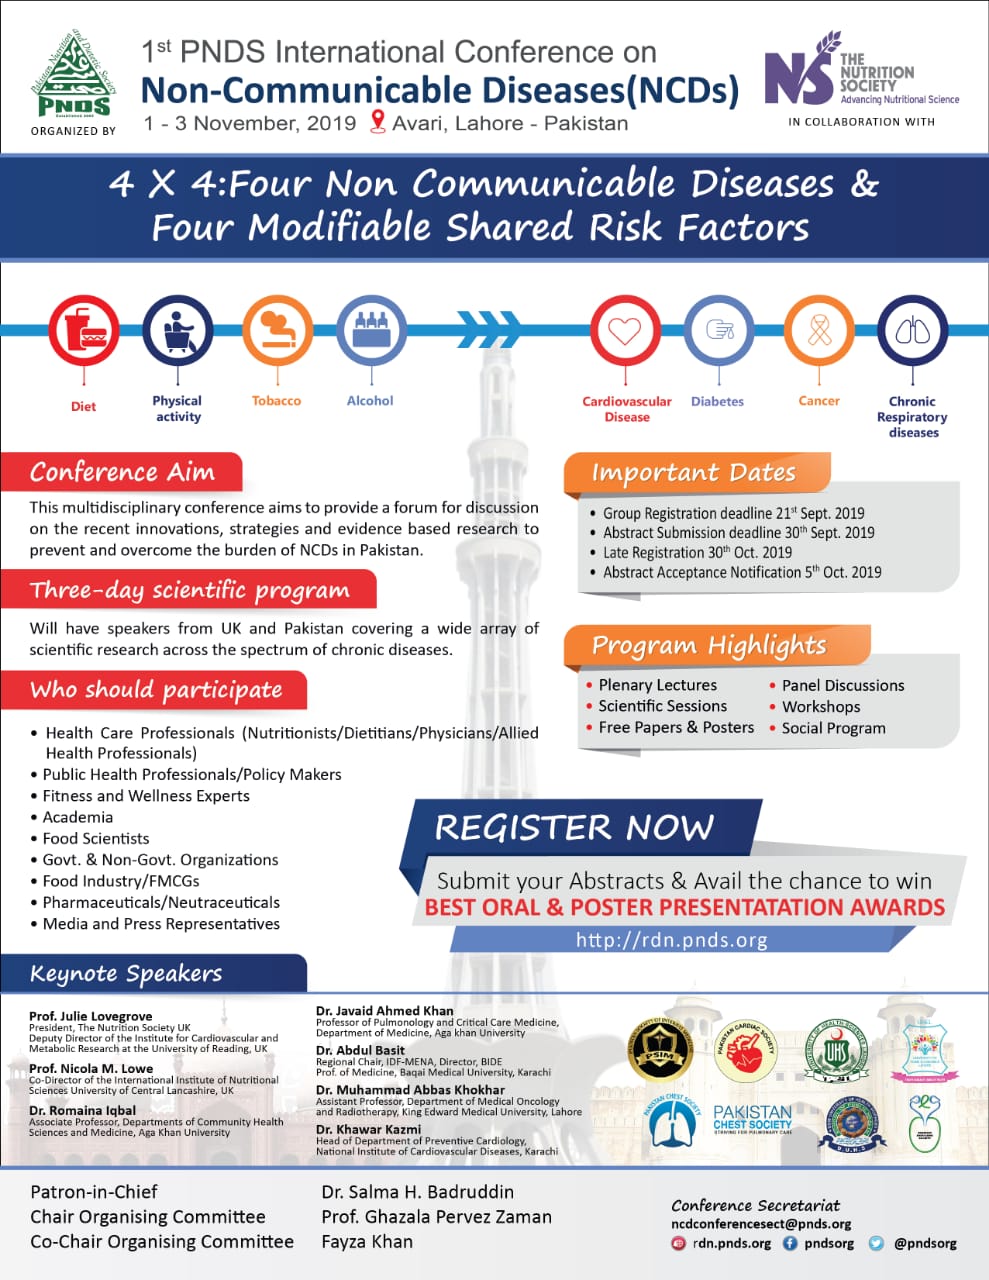 Second Announcement Ist PNDS Conference on NCDs 2019 Lahore Pakistan